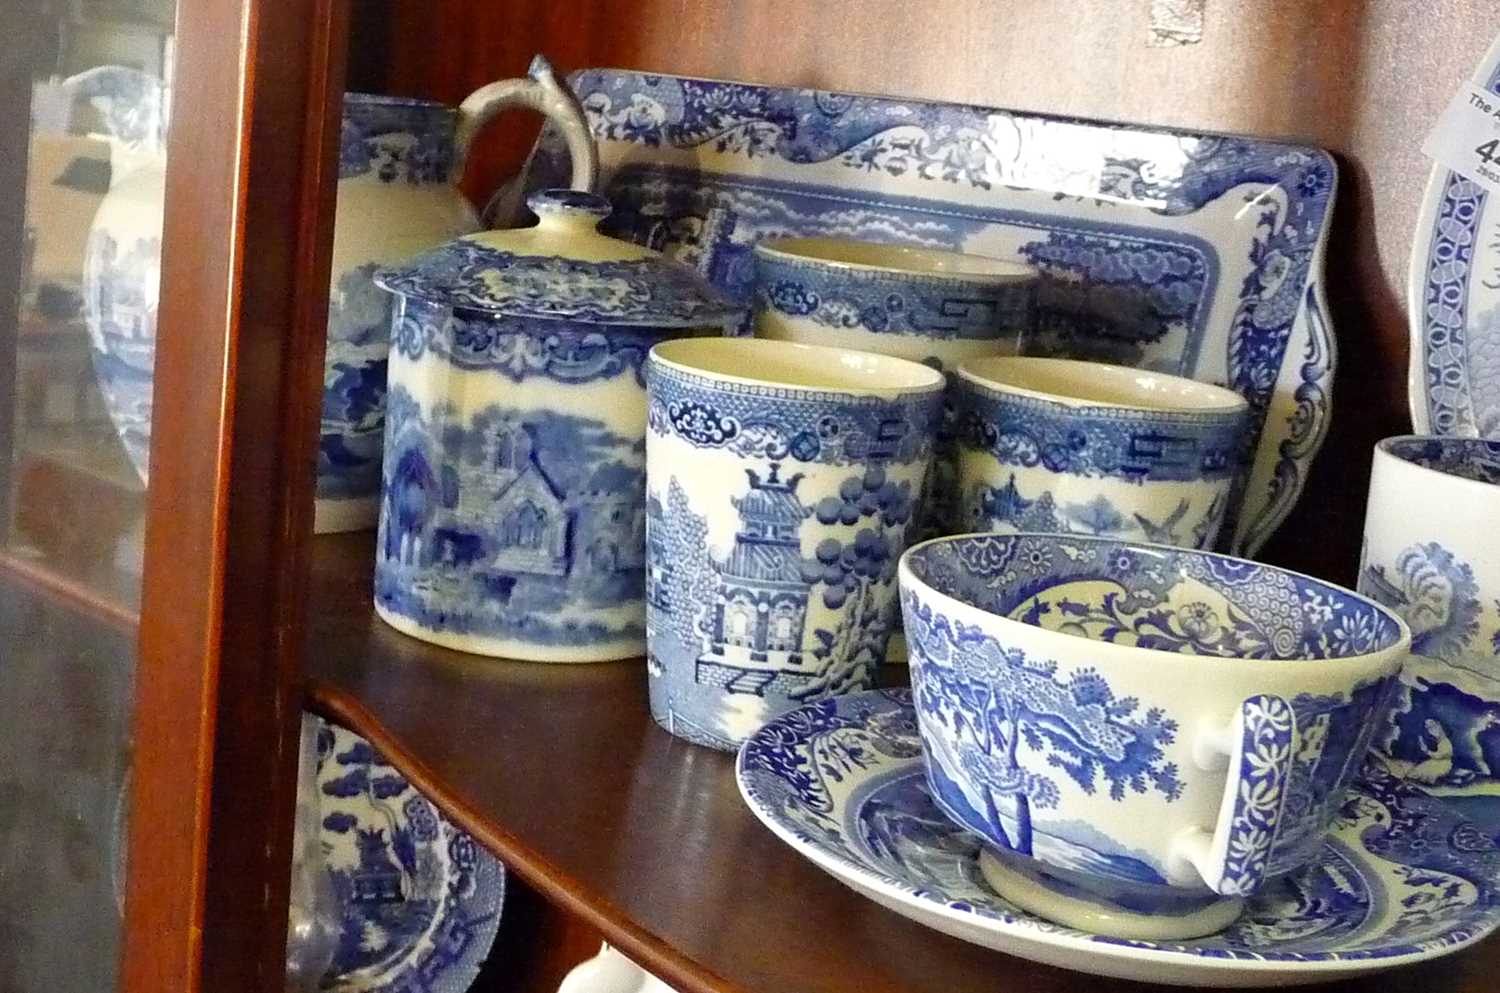 Willow pattern and other blue and white china by various makers, inc. Wedgwood, Spode, Wood & Sons - Image 2 of 4